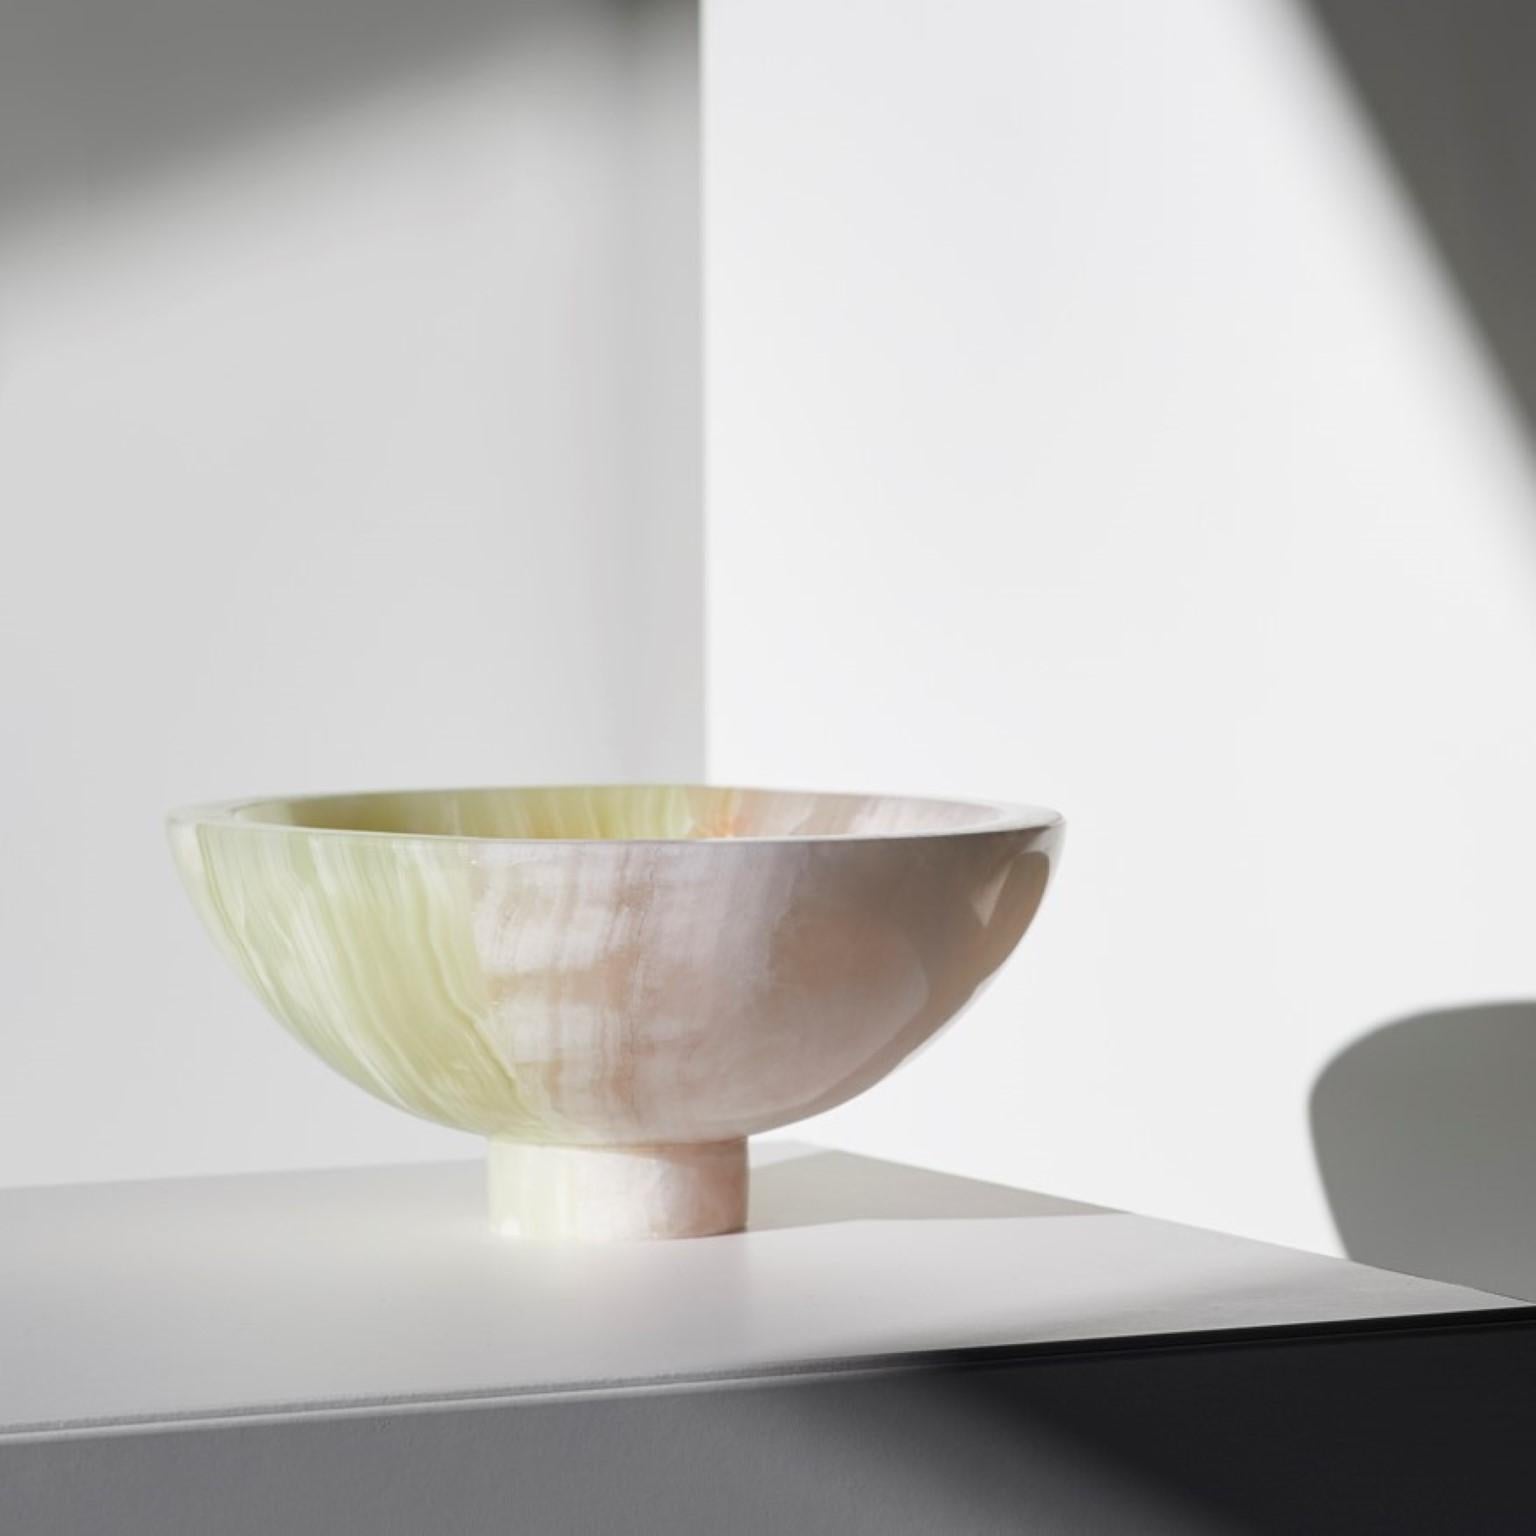 Set of 2 Twosidestory bowl by Lisette Rützou
Dimensions: D 20 cm
Materials: Candy Onyx

 Lisette Rützou’s design is motivated by an urge to articulate a story. Inspired by the beauty of materials, form and architecture, each design is an